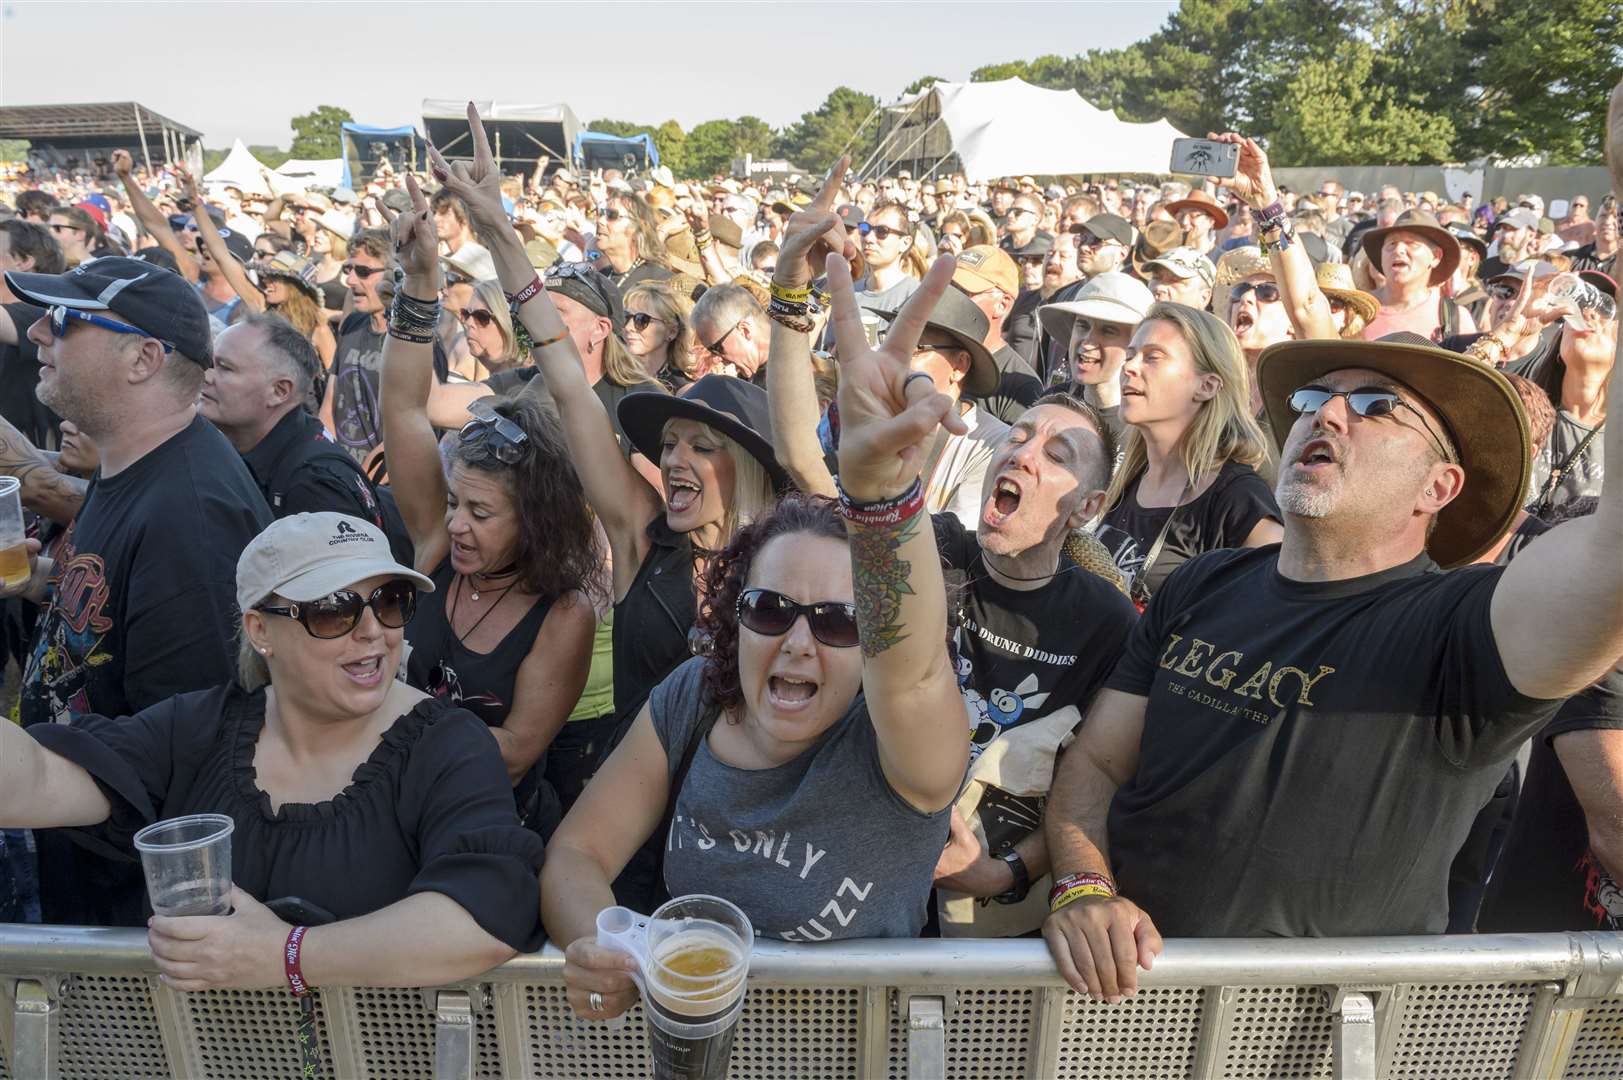 The original promoters of Ramblin' Man have gone into liquidation - but a new team have vowed to ensure it returns for July 2022